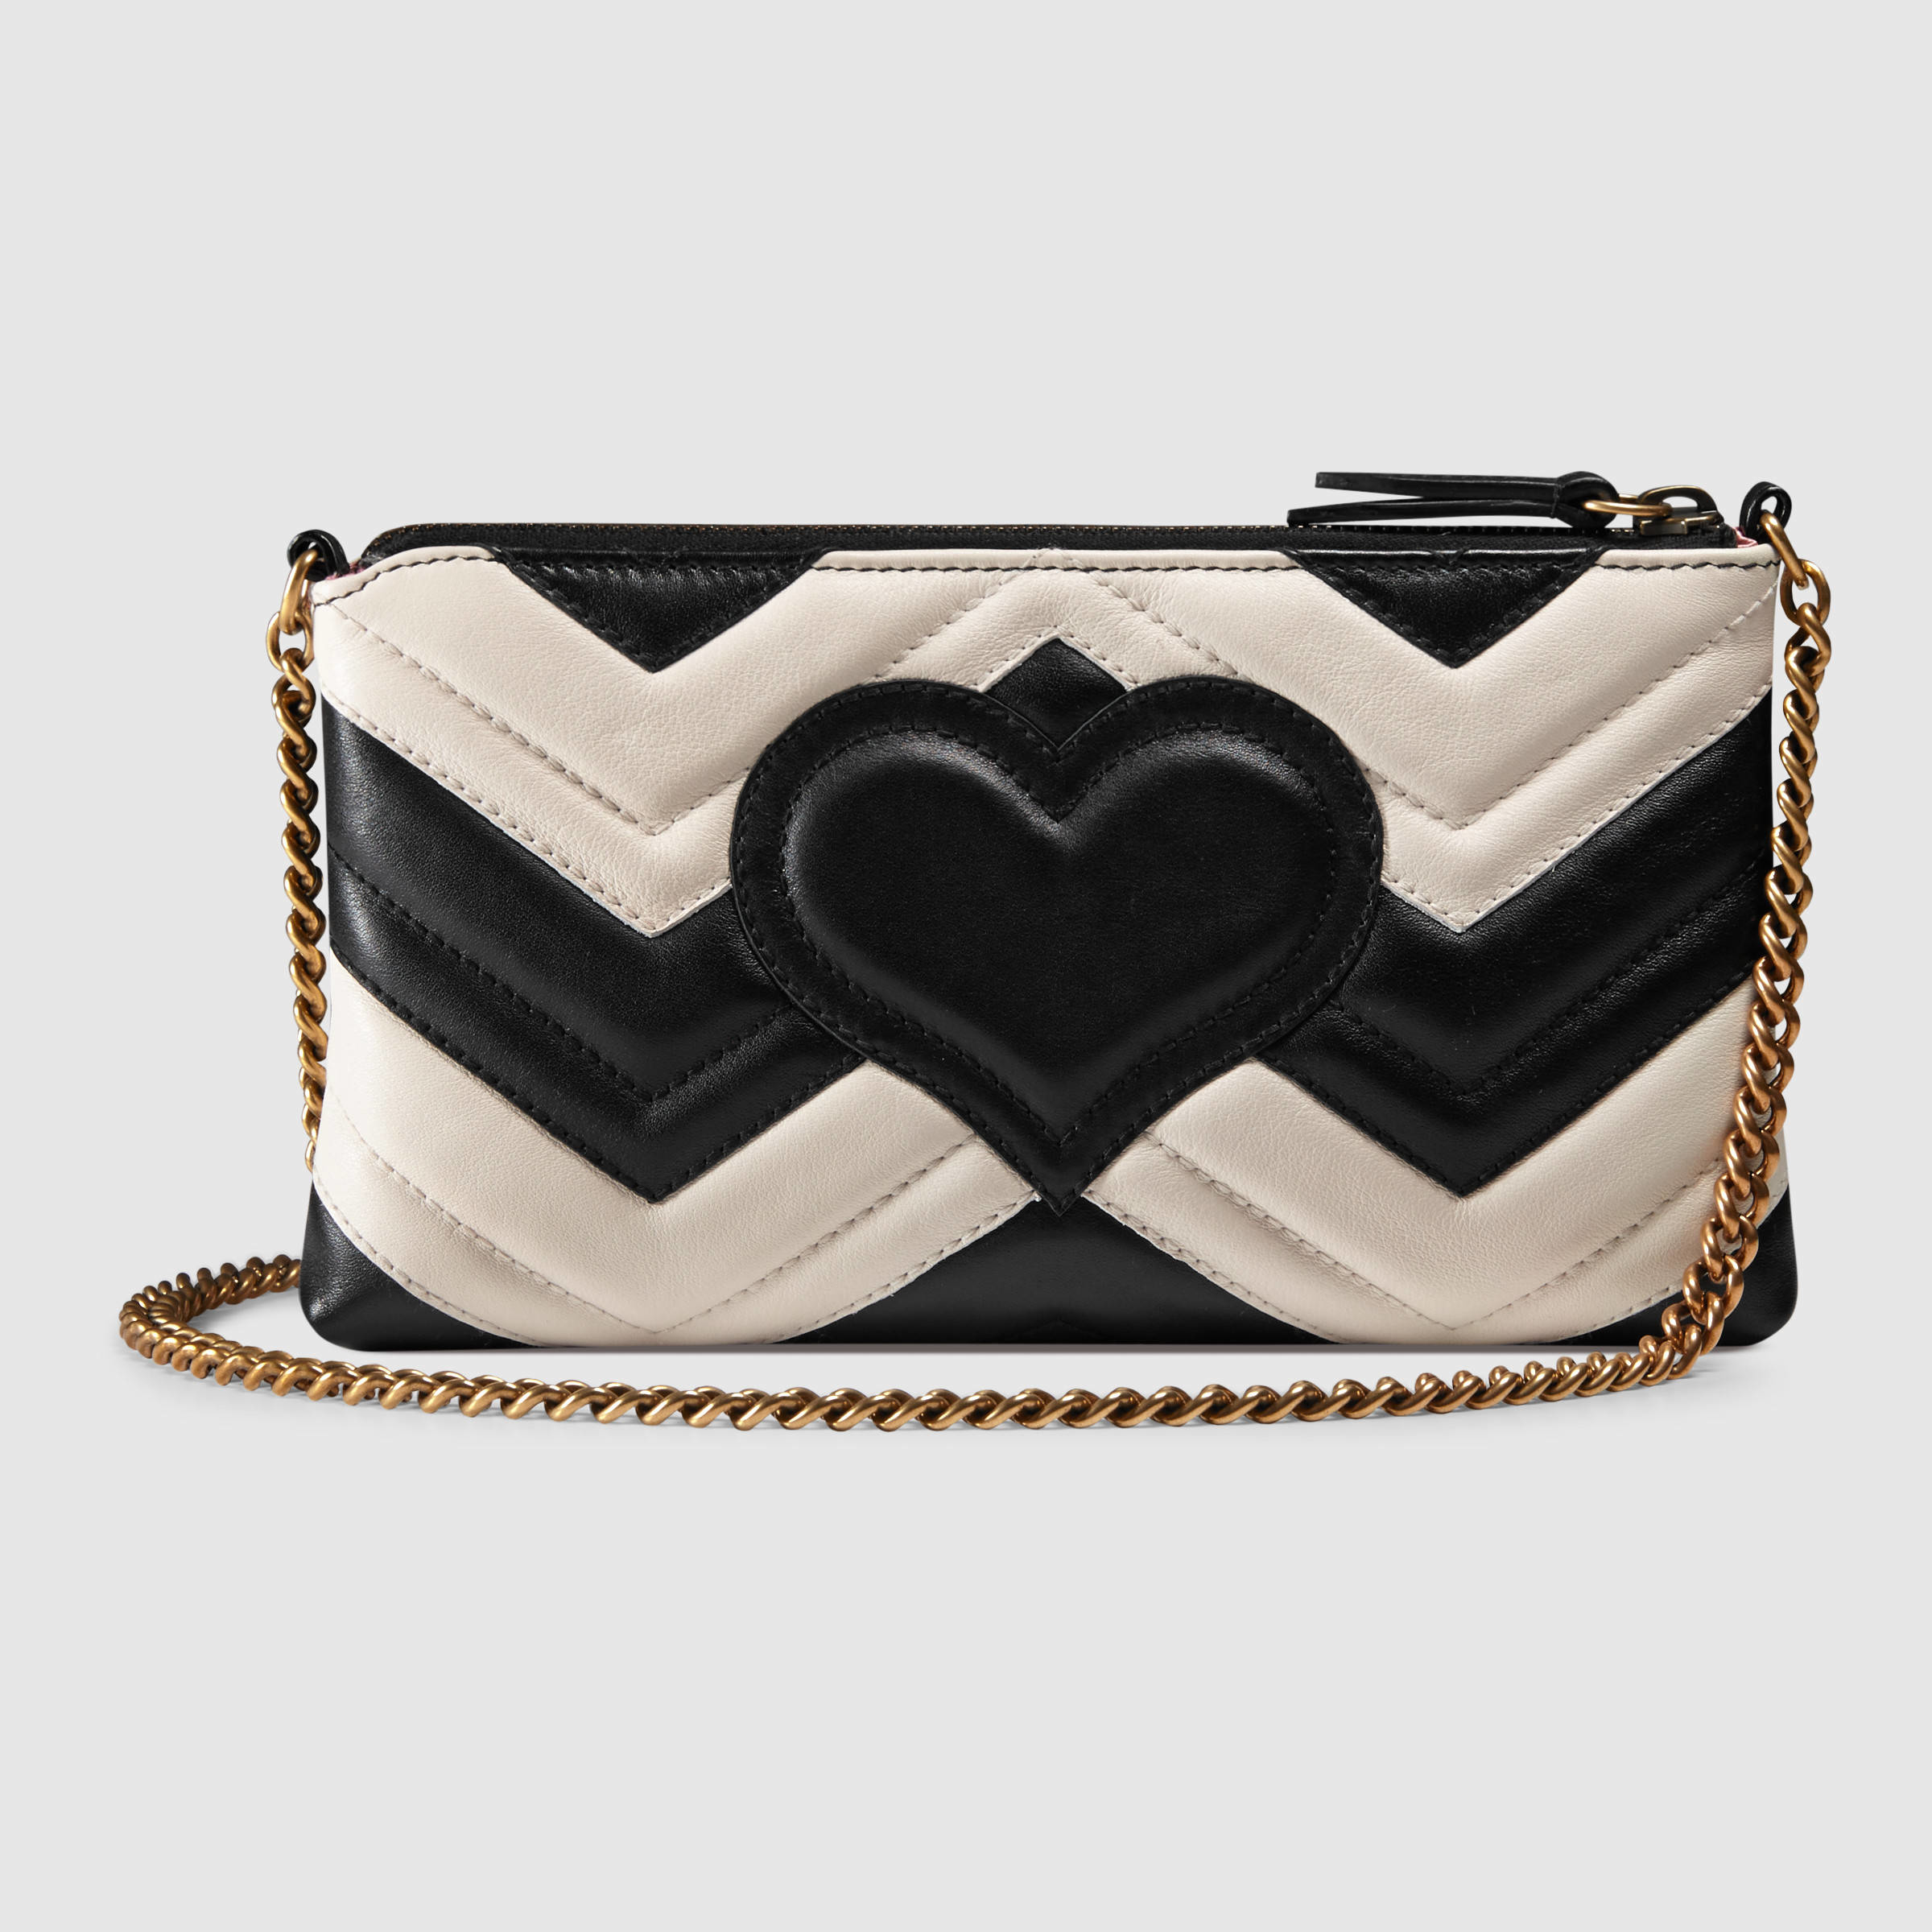 Lyst - Gucci GG Marmont Mini Leather Chain Bag in Black